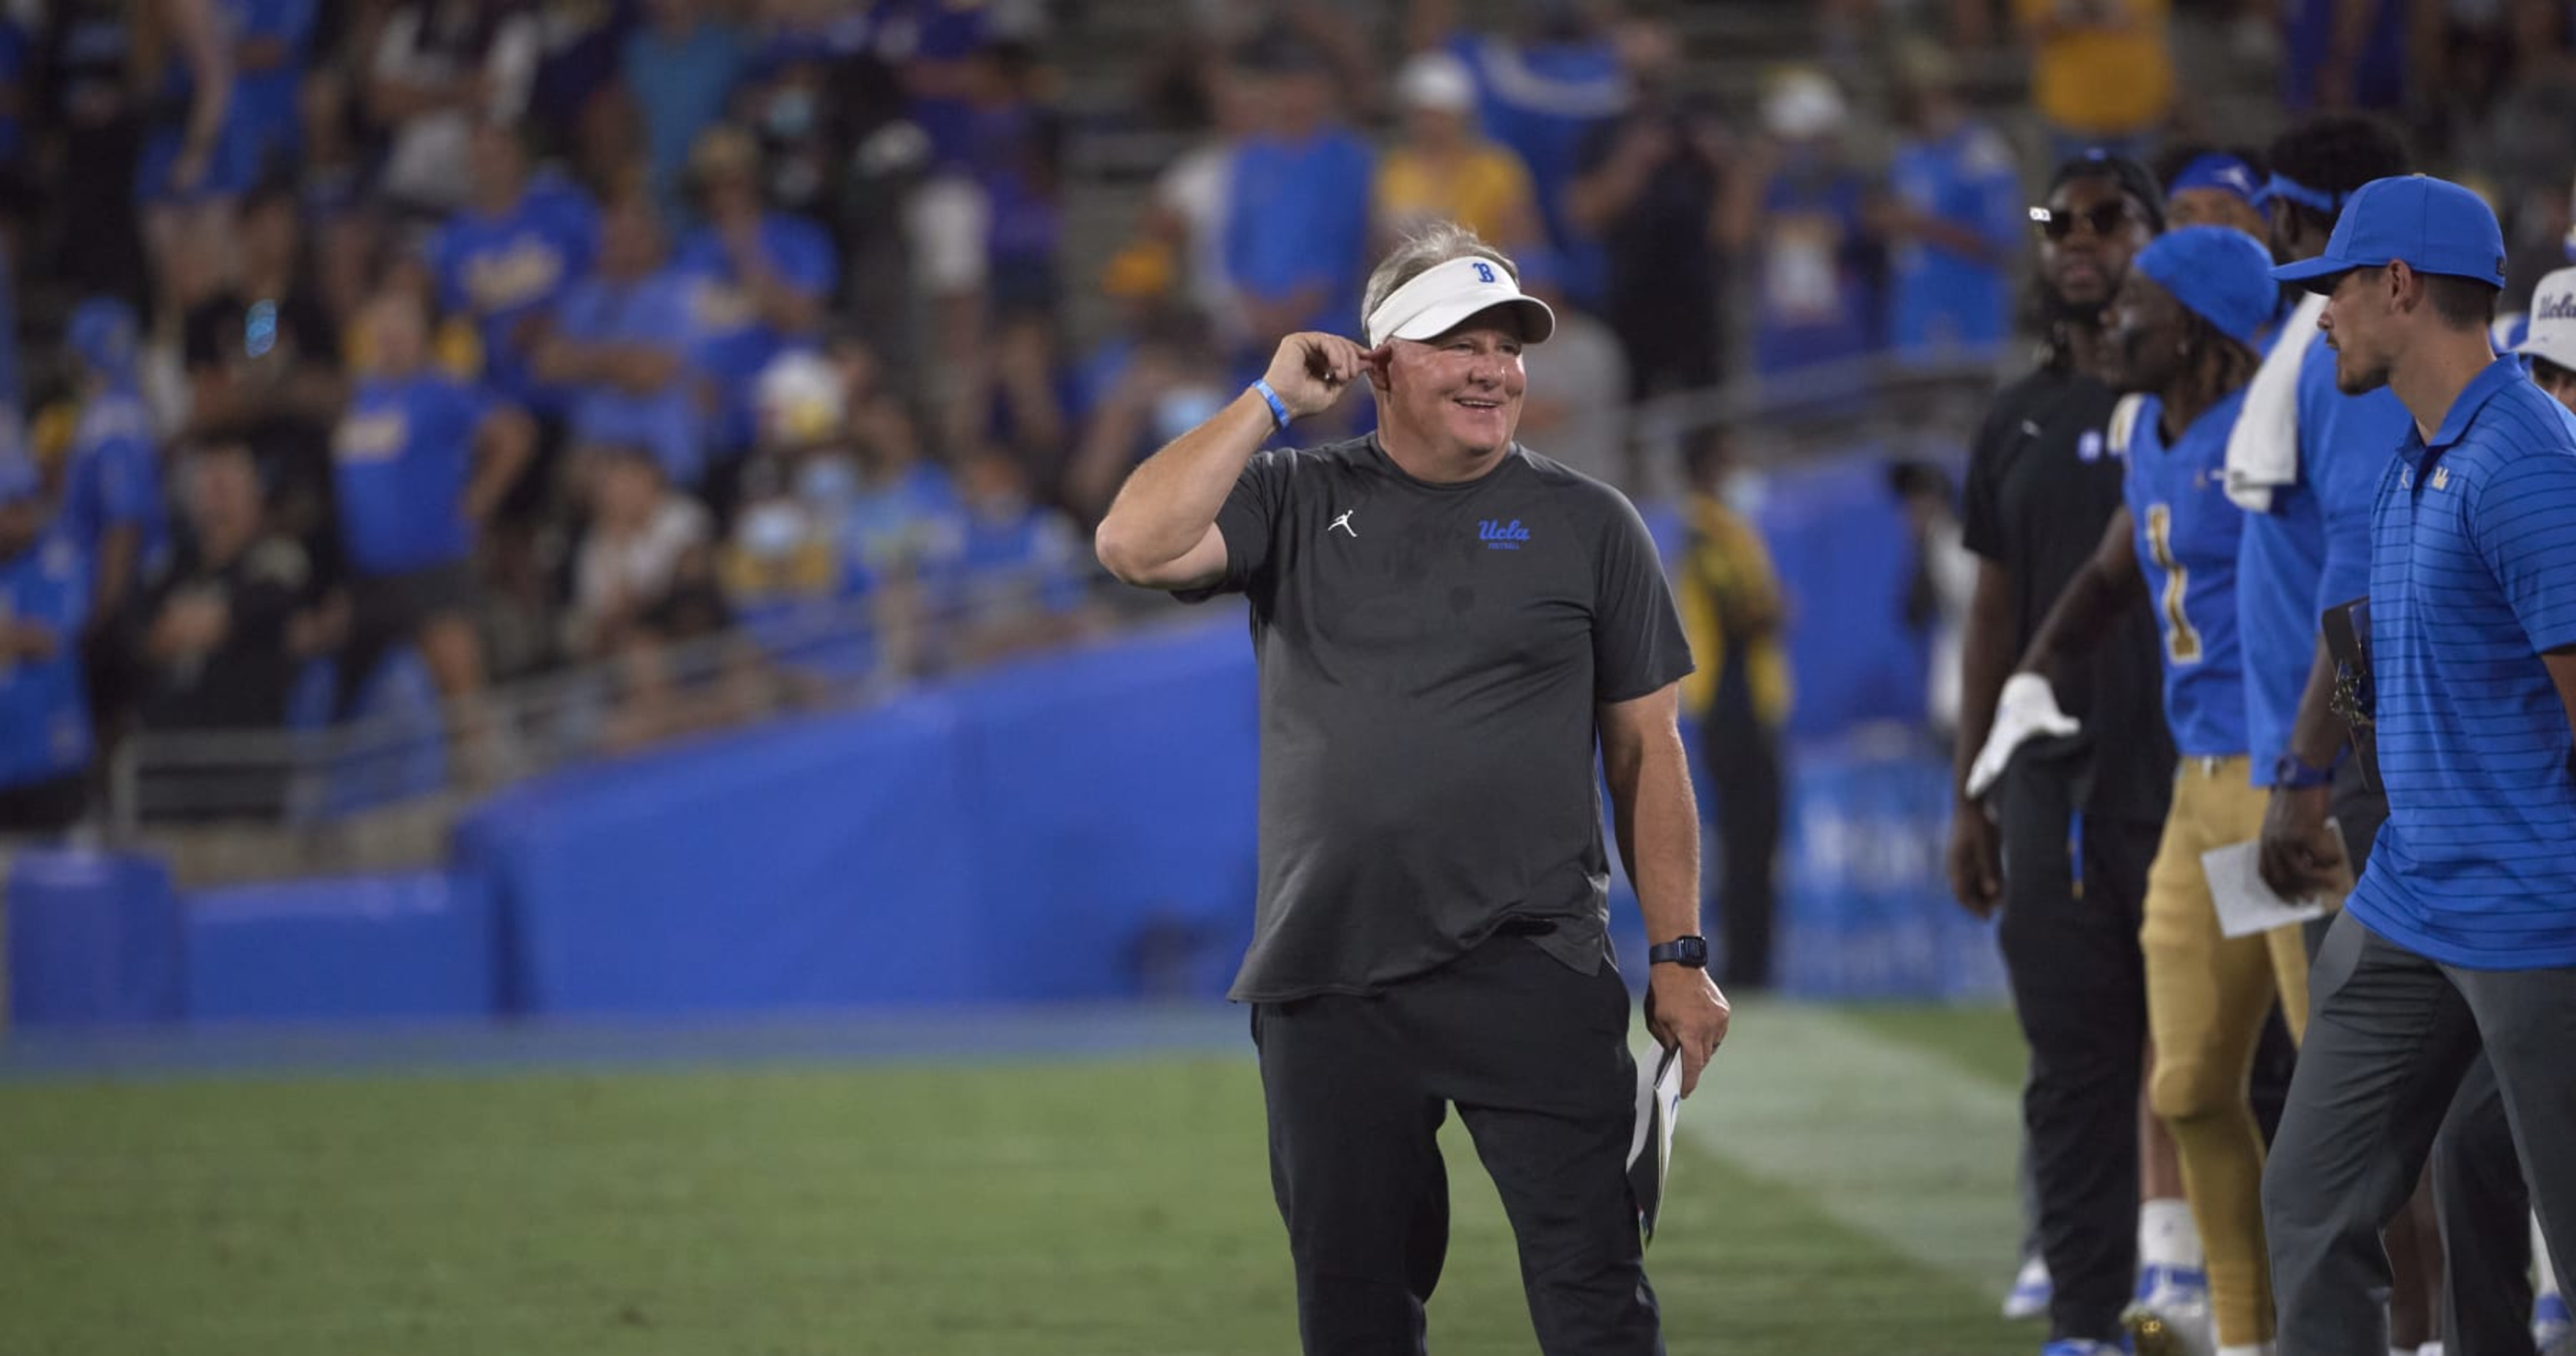 Comparing Louisville's Jeff Brohm to Kentucky's Mark Stoops